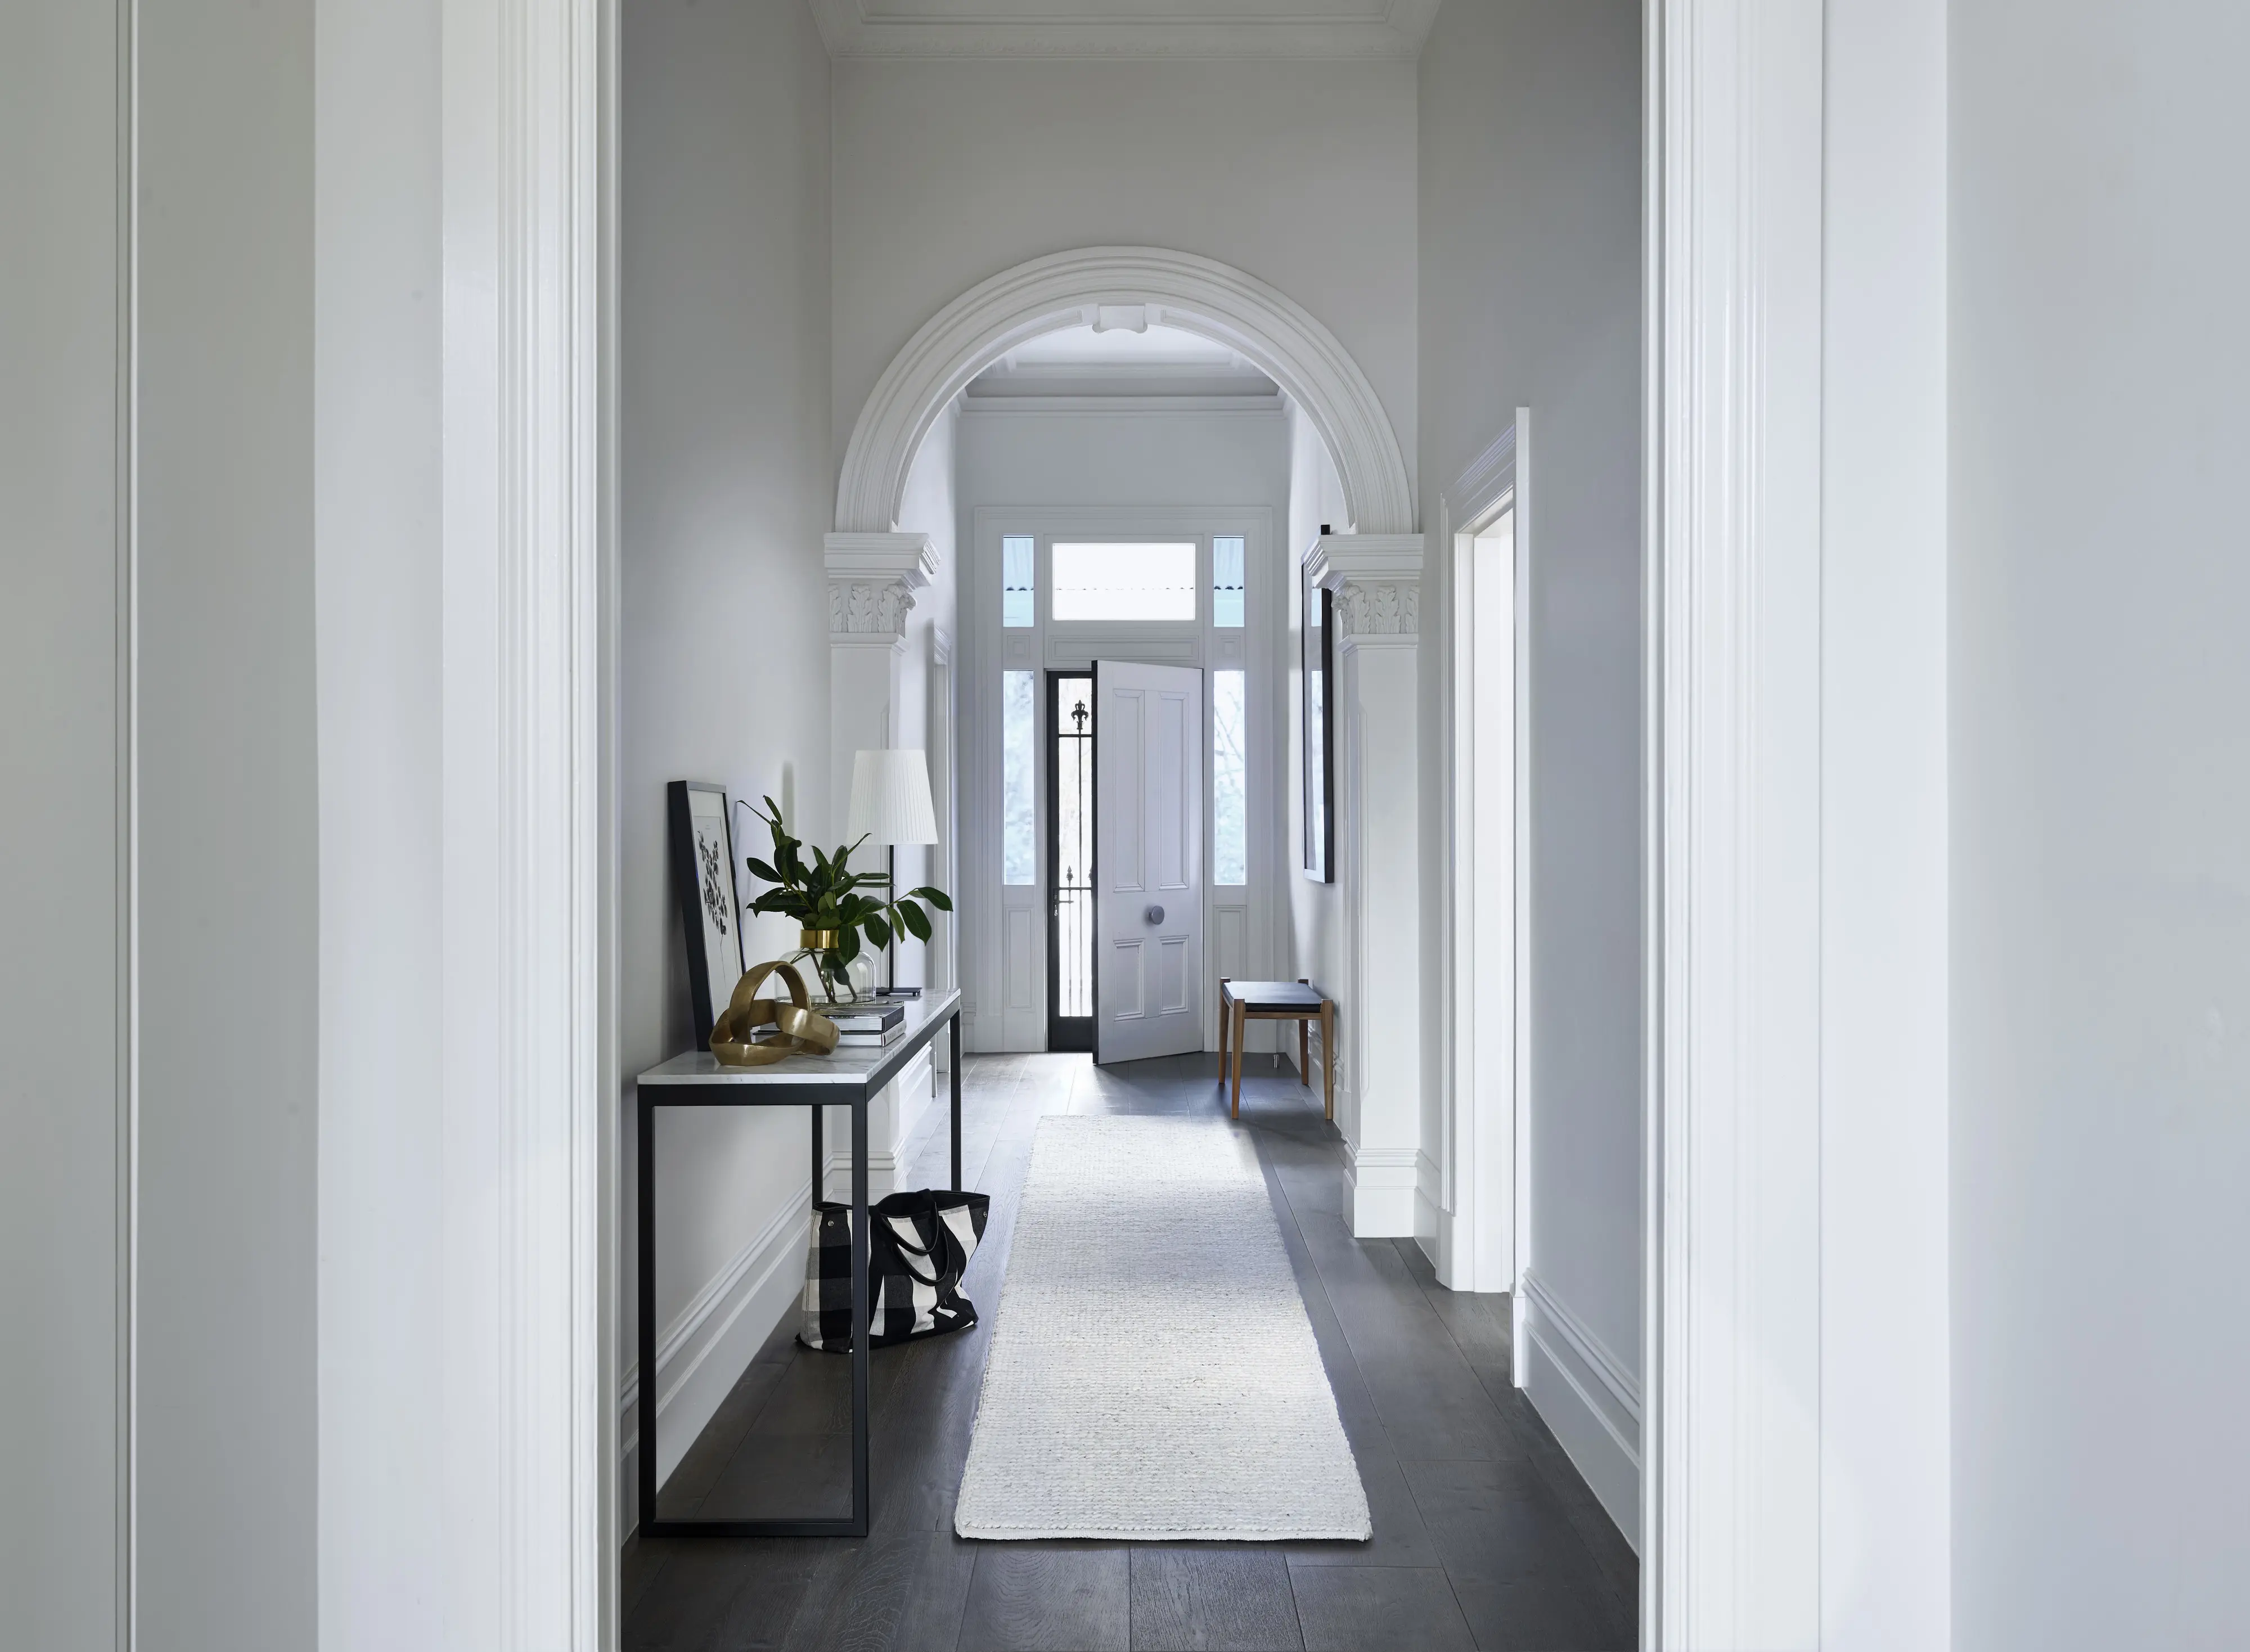 Dulux Terrace White featured on Hallway walls in home.